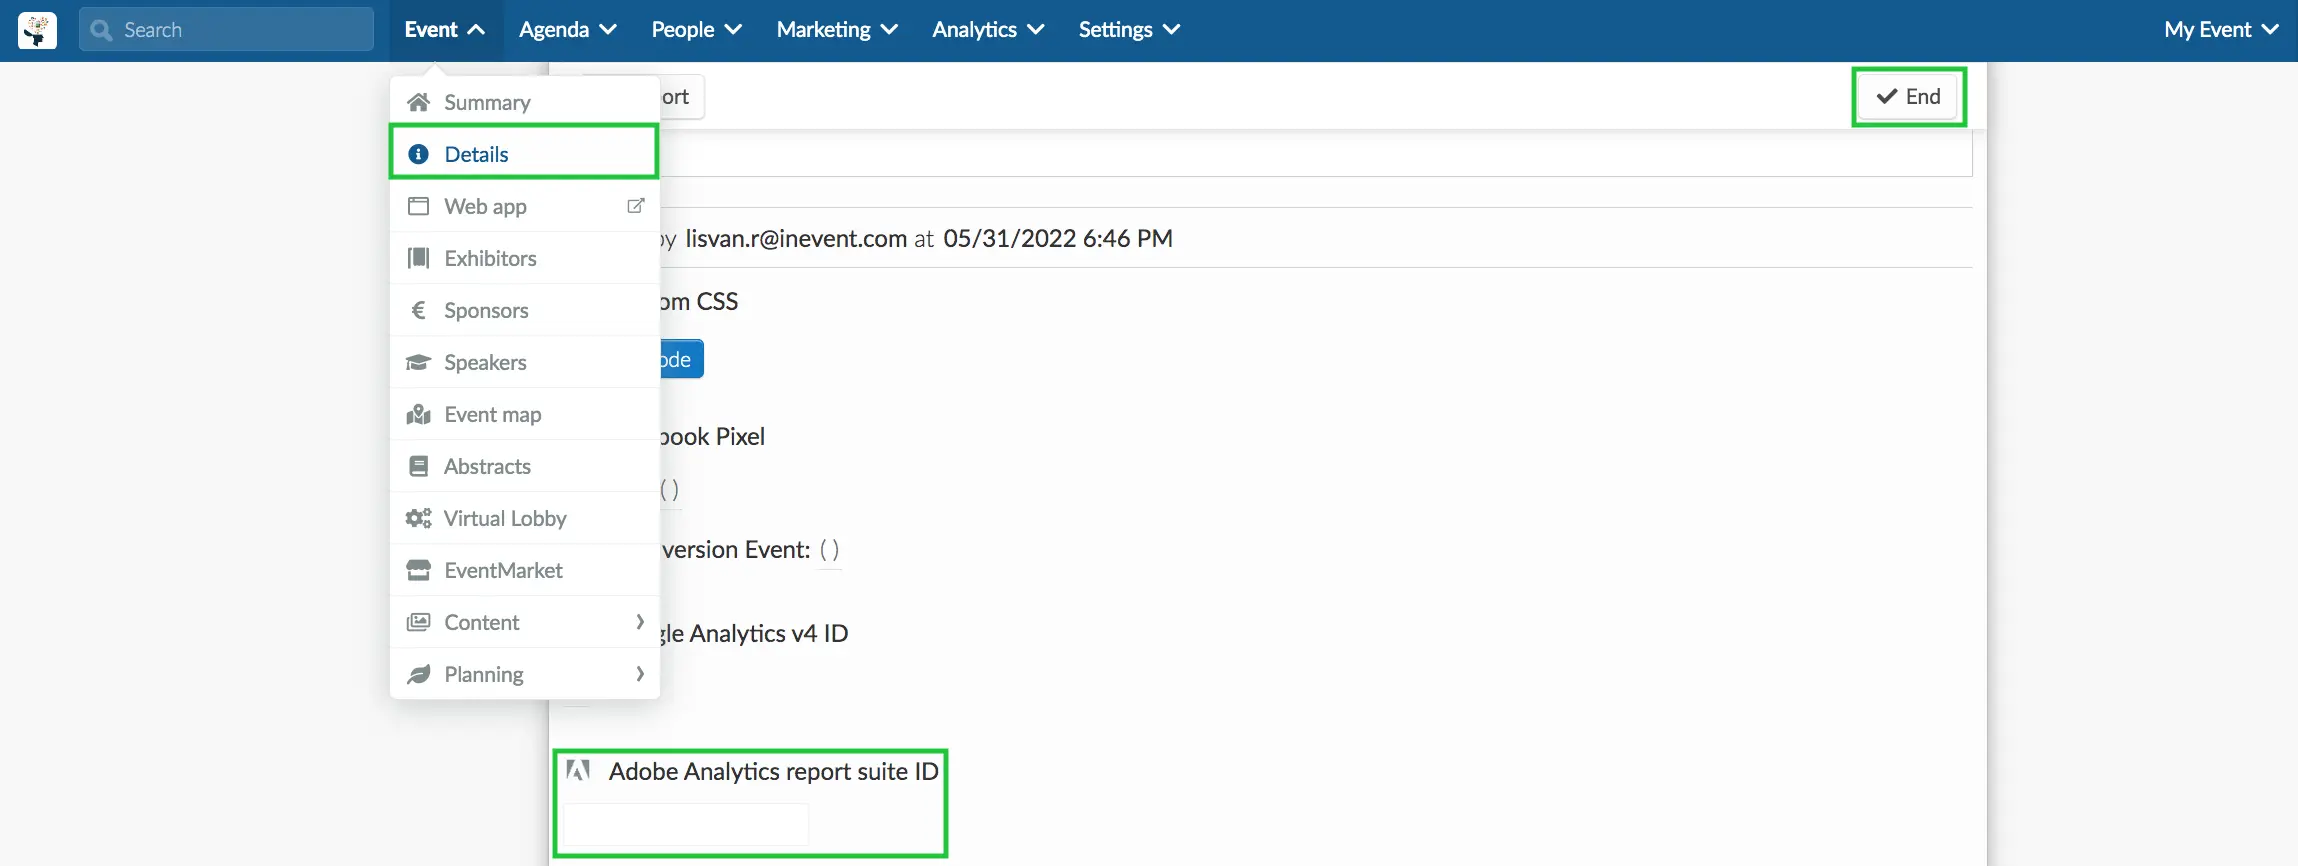 Image showing Adobe Analytics report suit ID field in Events > Details